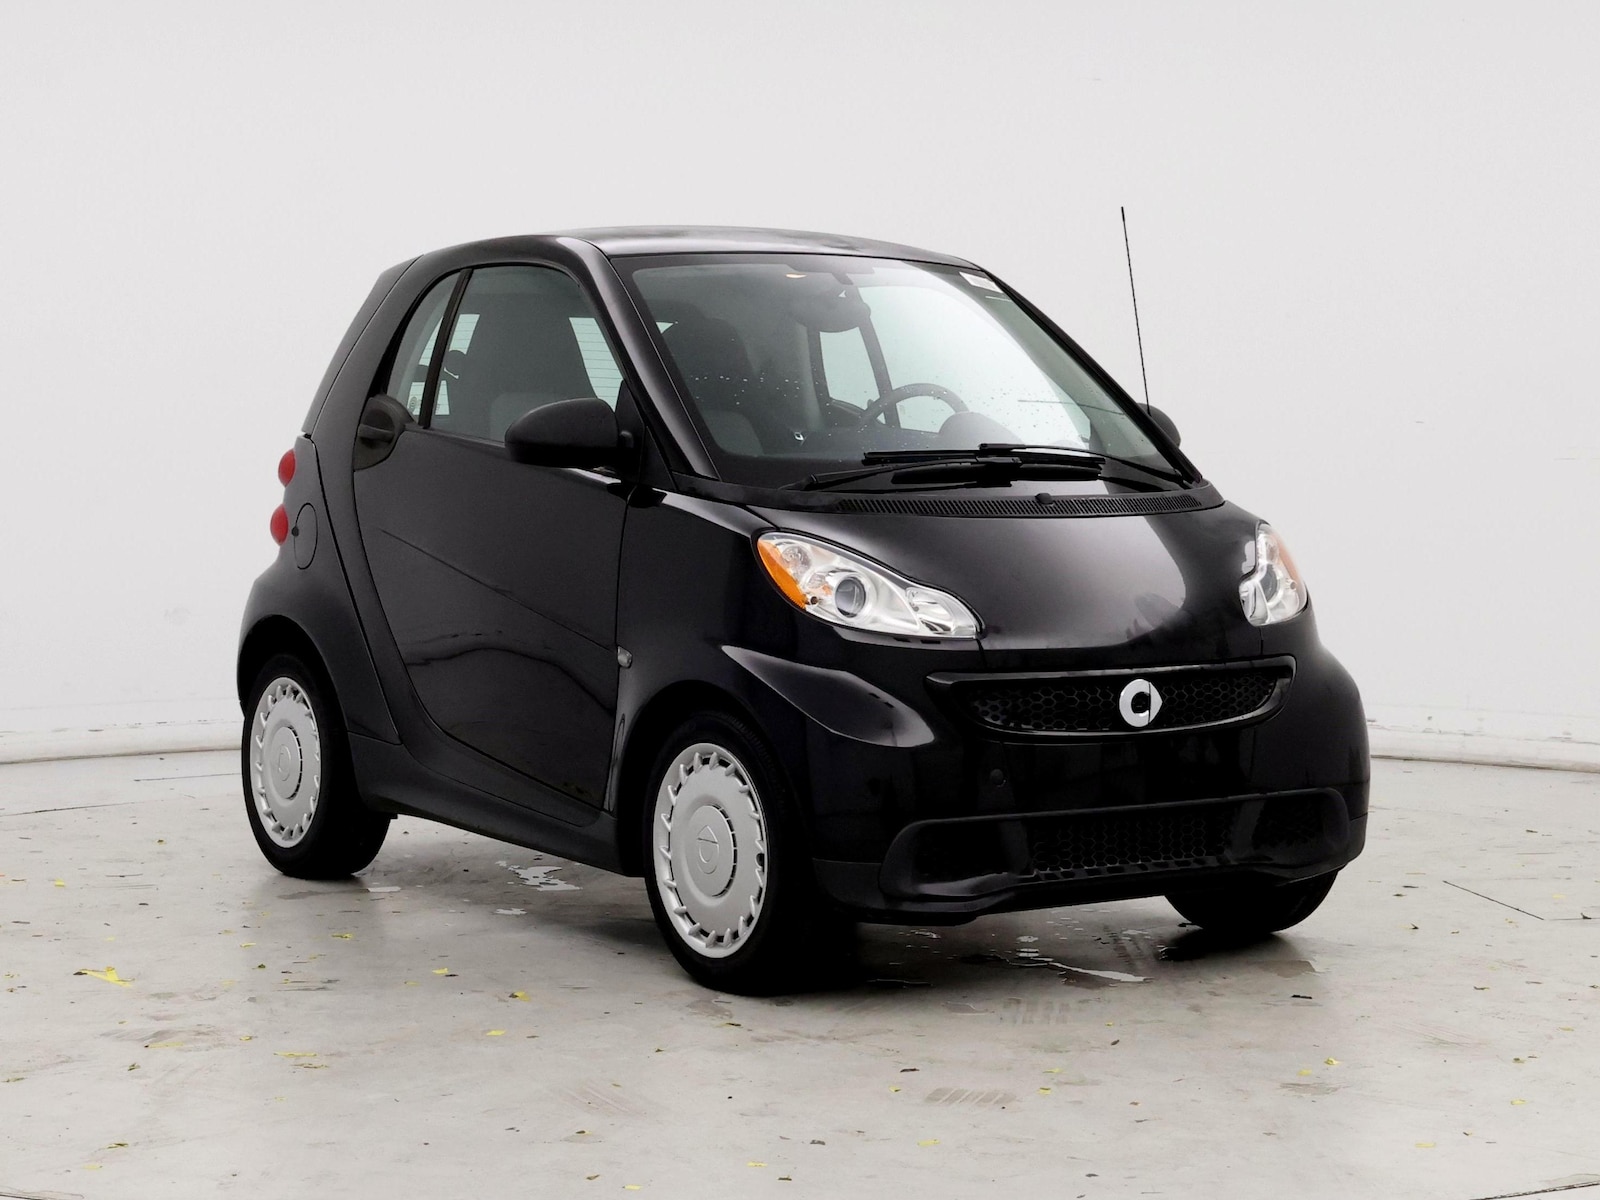 Used 2013 smart fortwo pure with VIN WMEEJ3BAXDK706608 for sale in Spokane Valley, WA